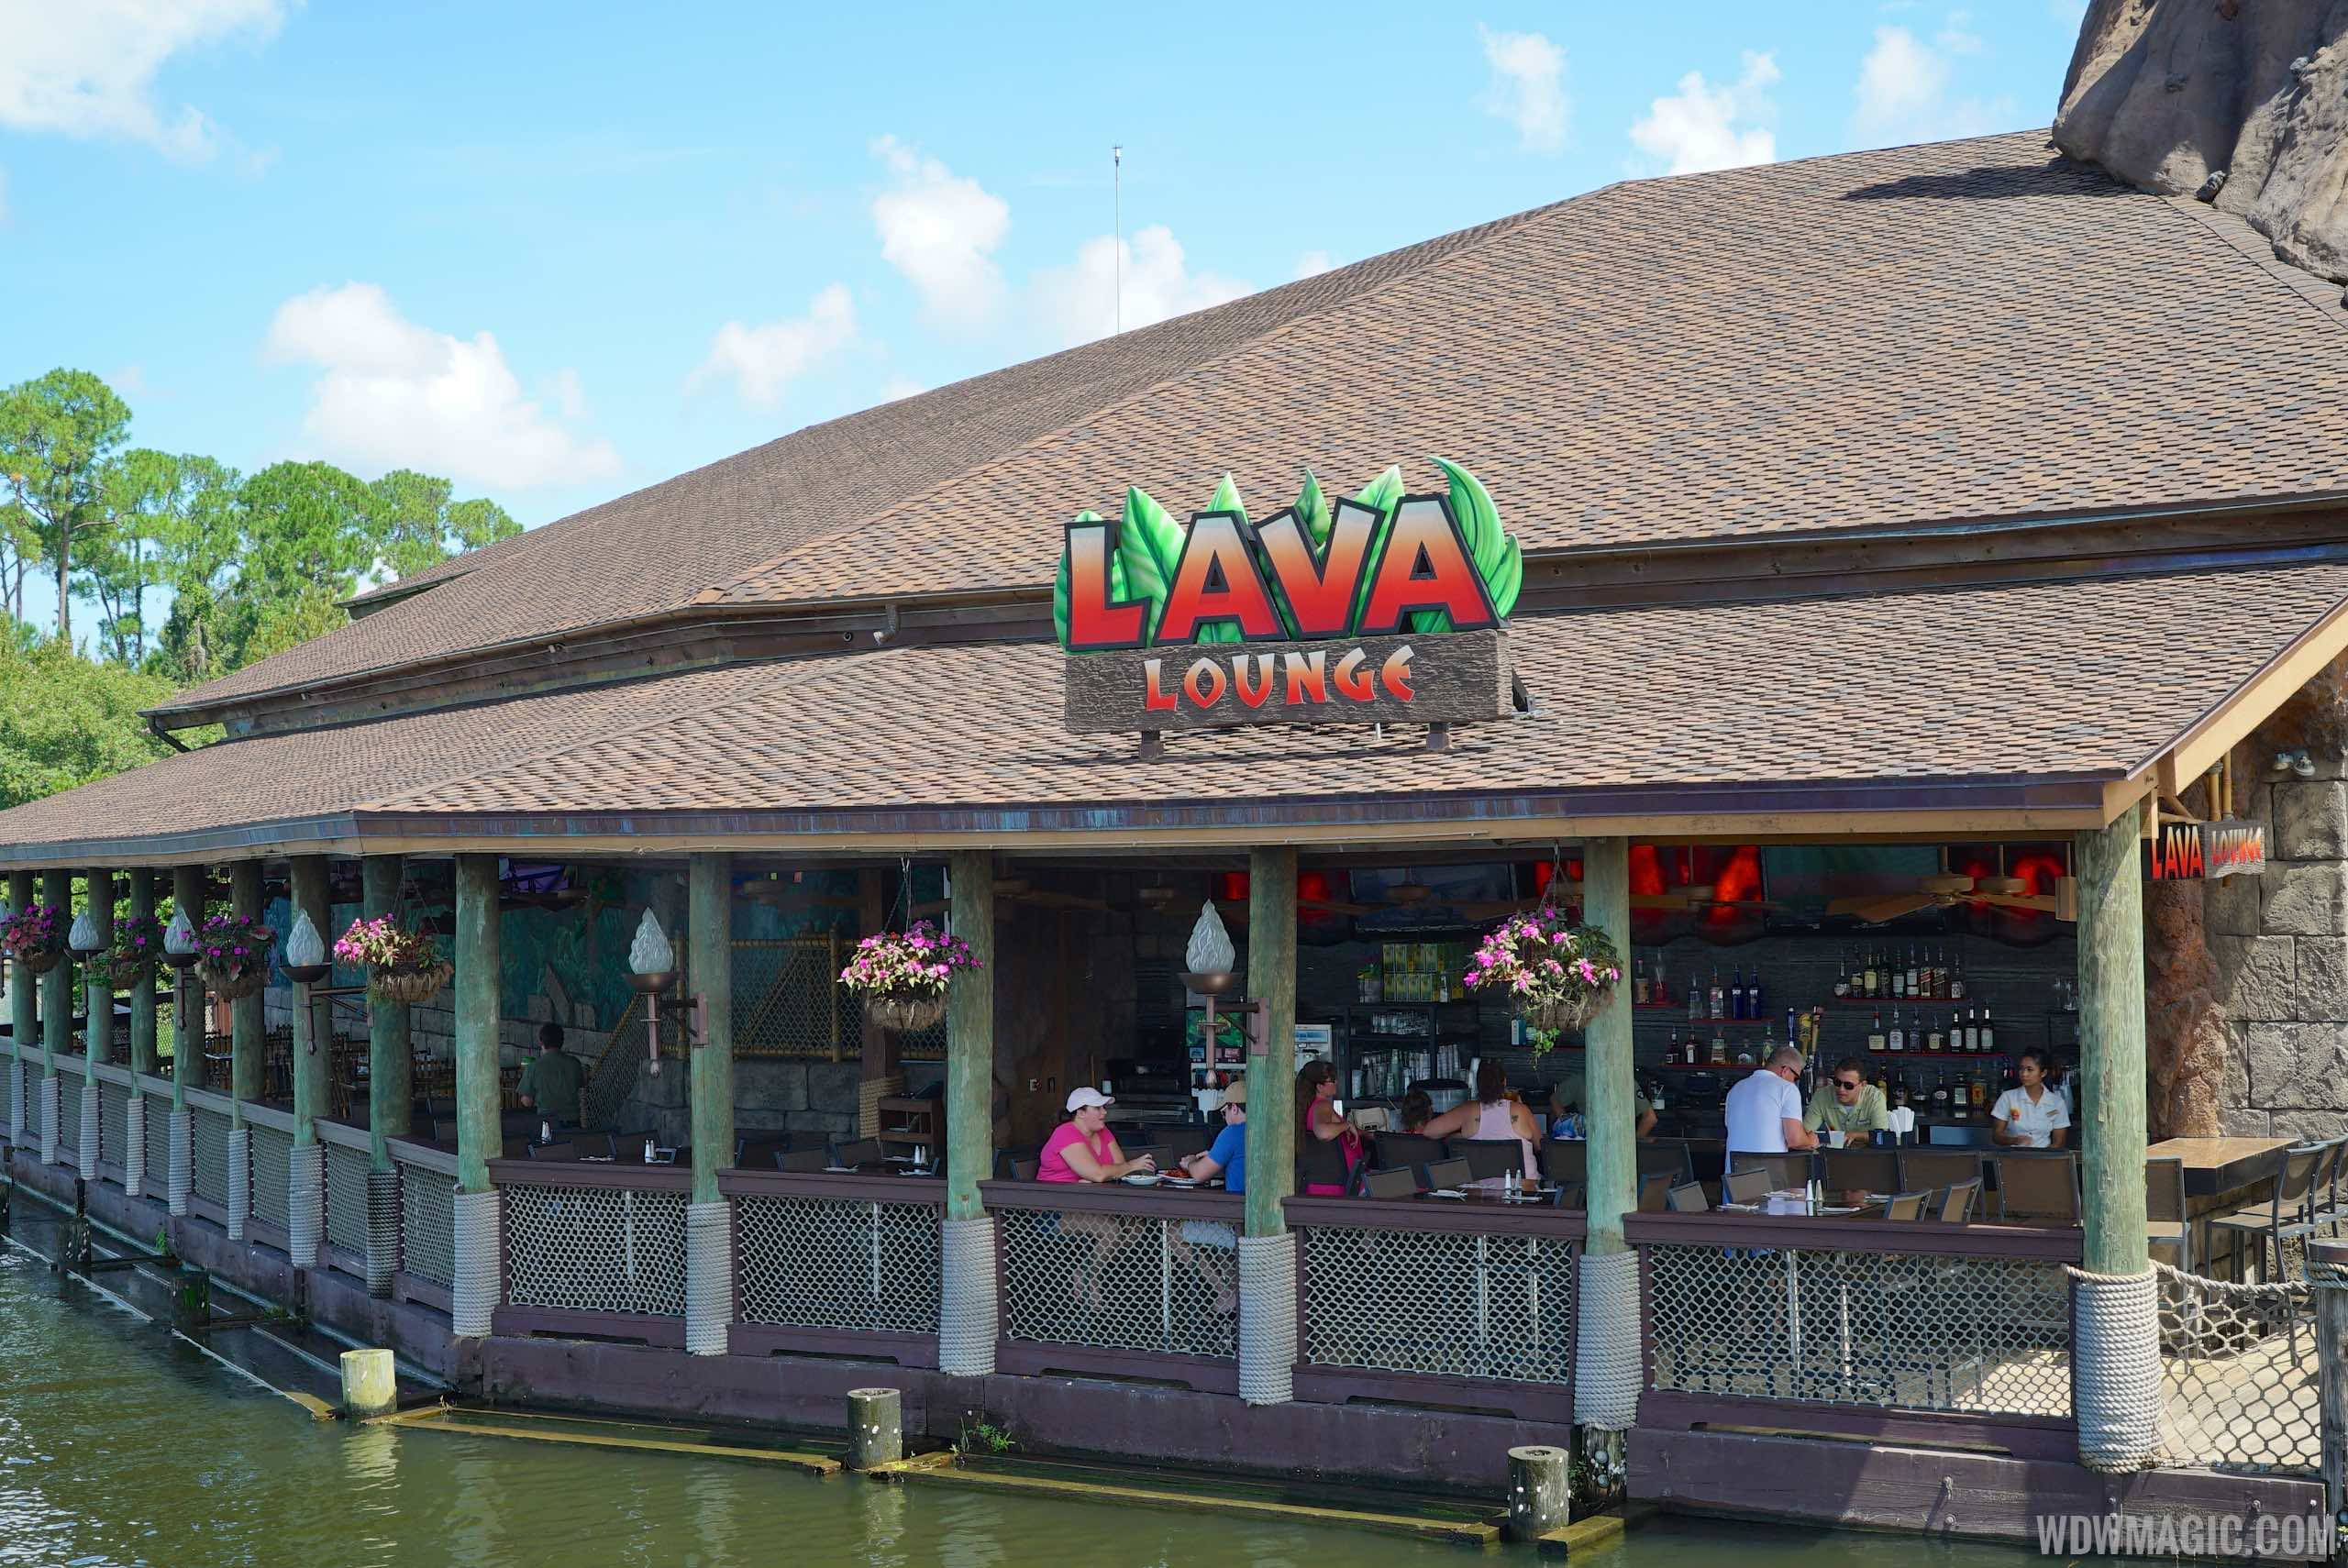 Lava Lounge overview